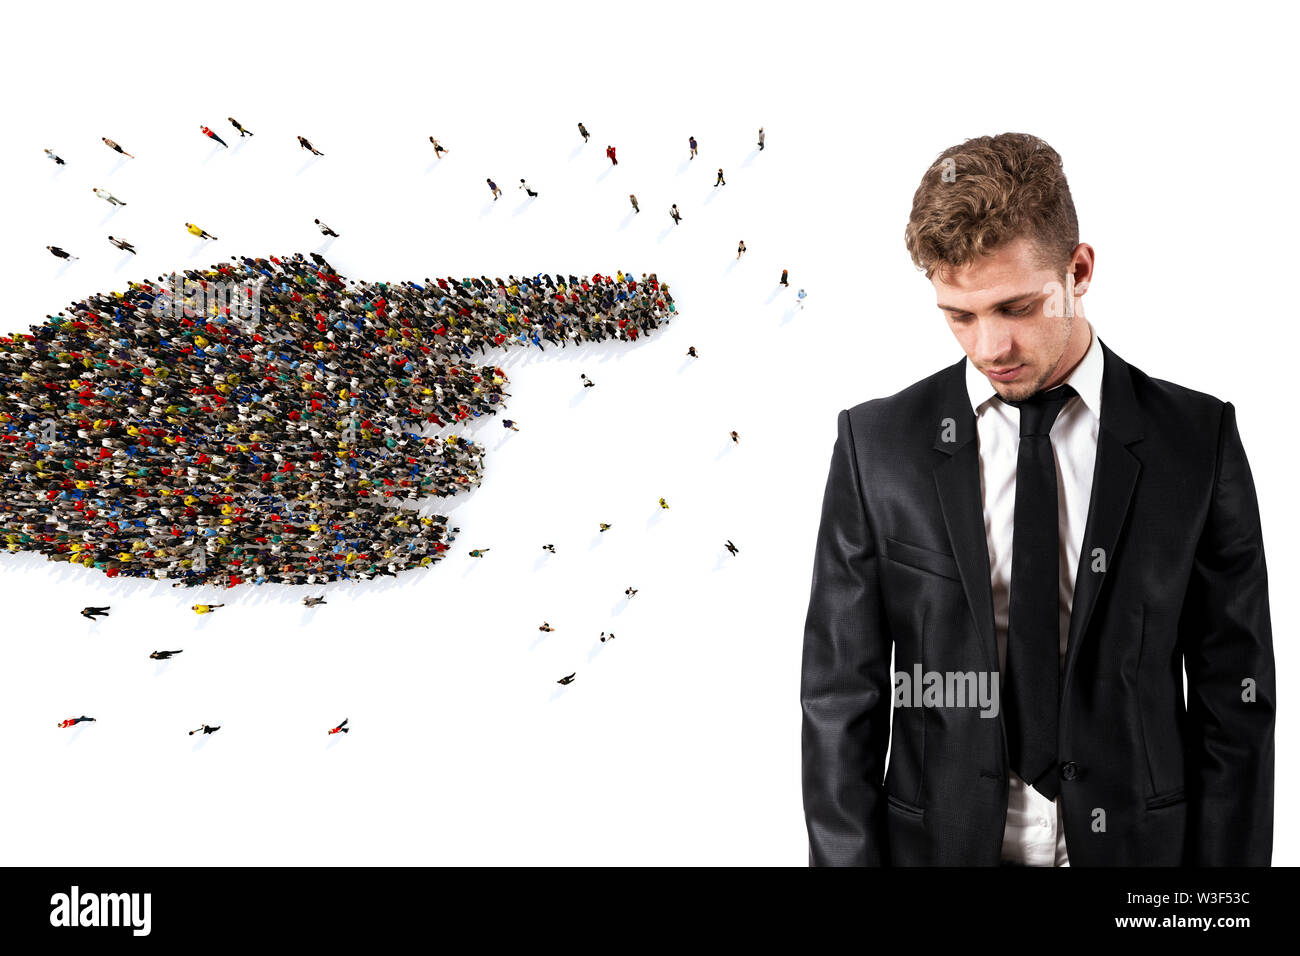 Crowd of people united forming a hand pointing a sad man. 3D Rendering Stock Photo